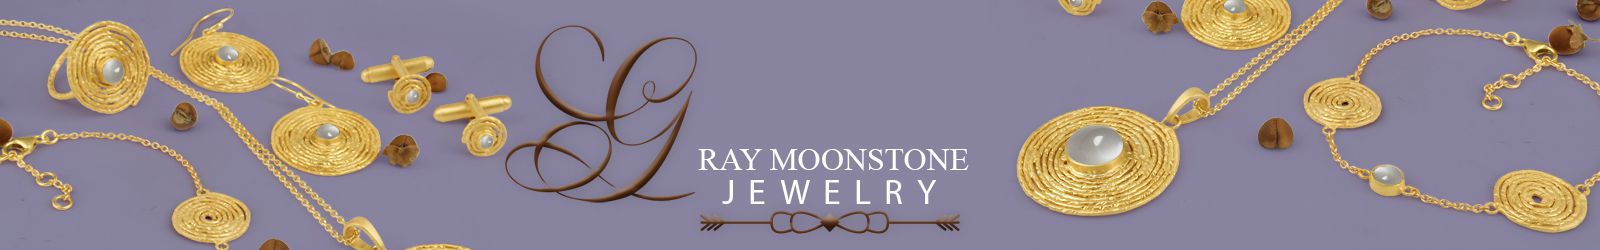 Silver Gray Moonstone Jewelry Wholesale Supplier